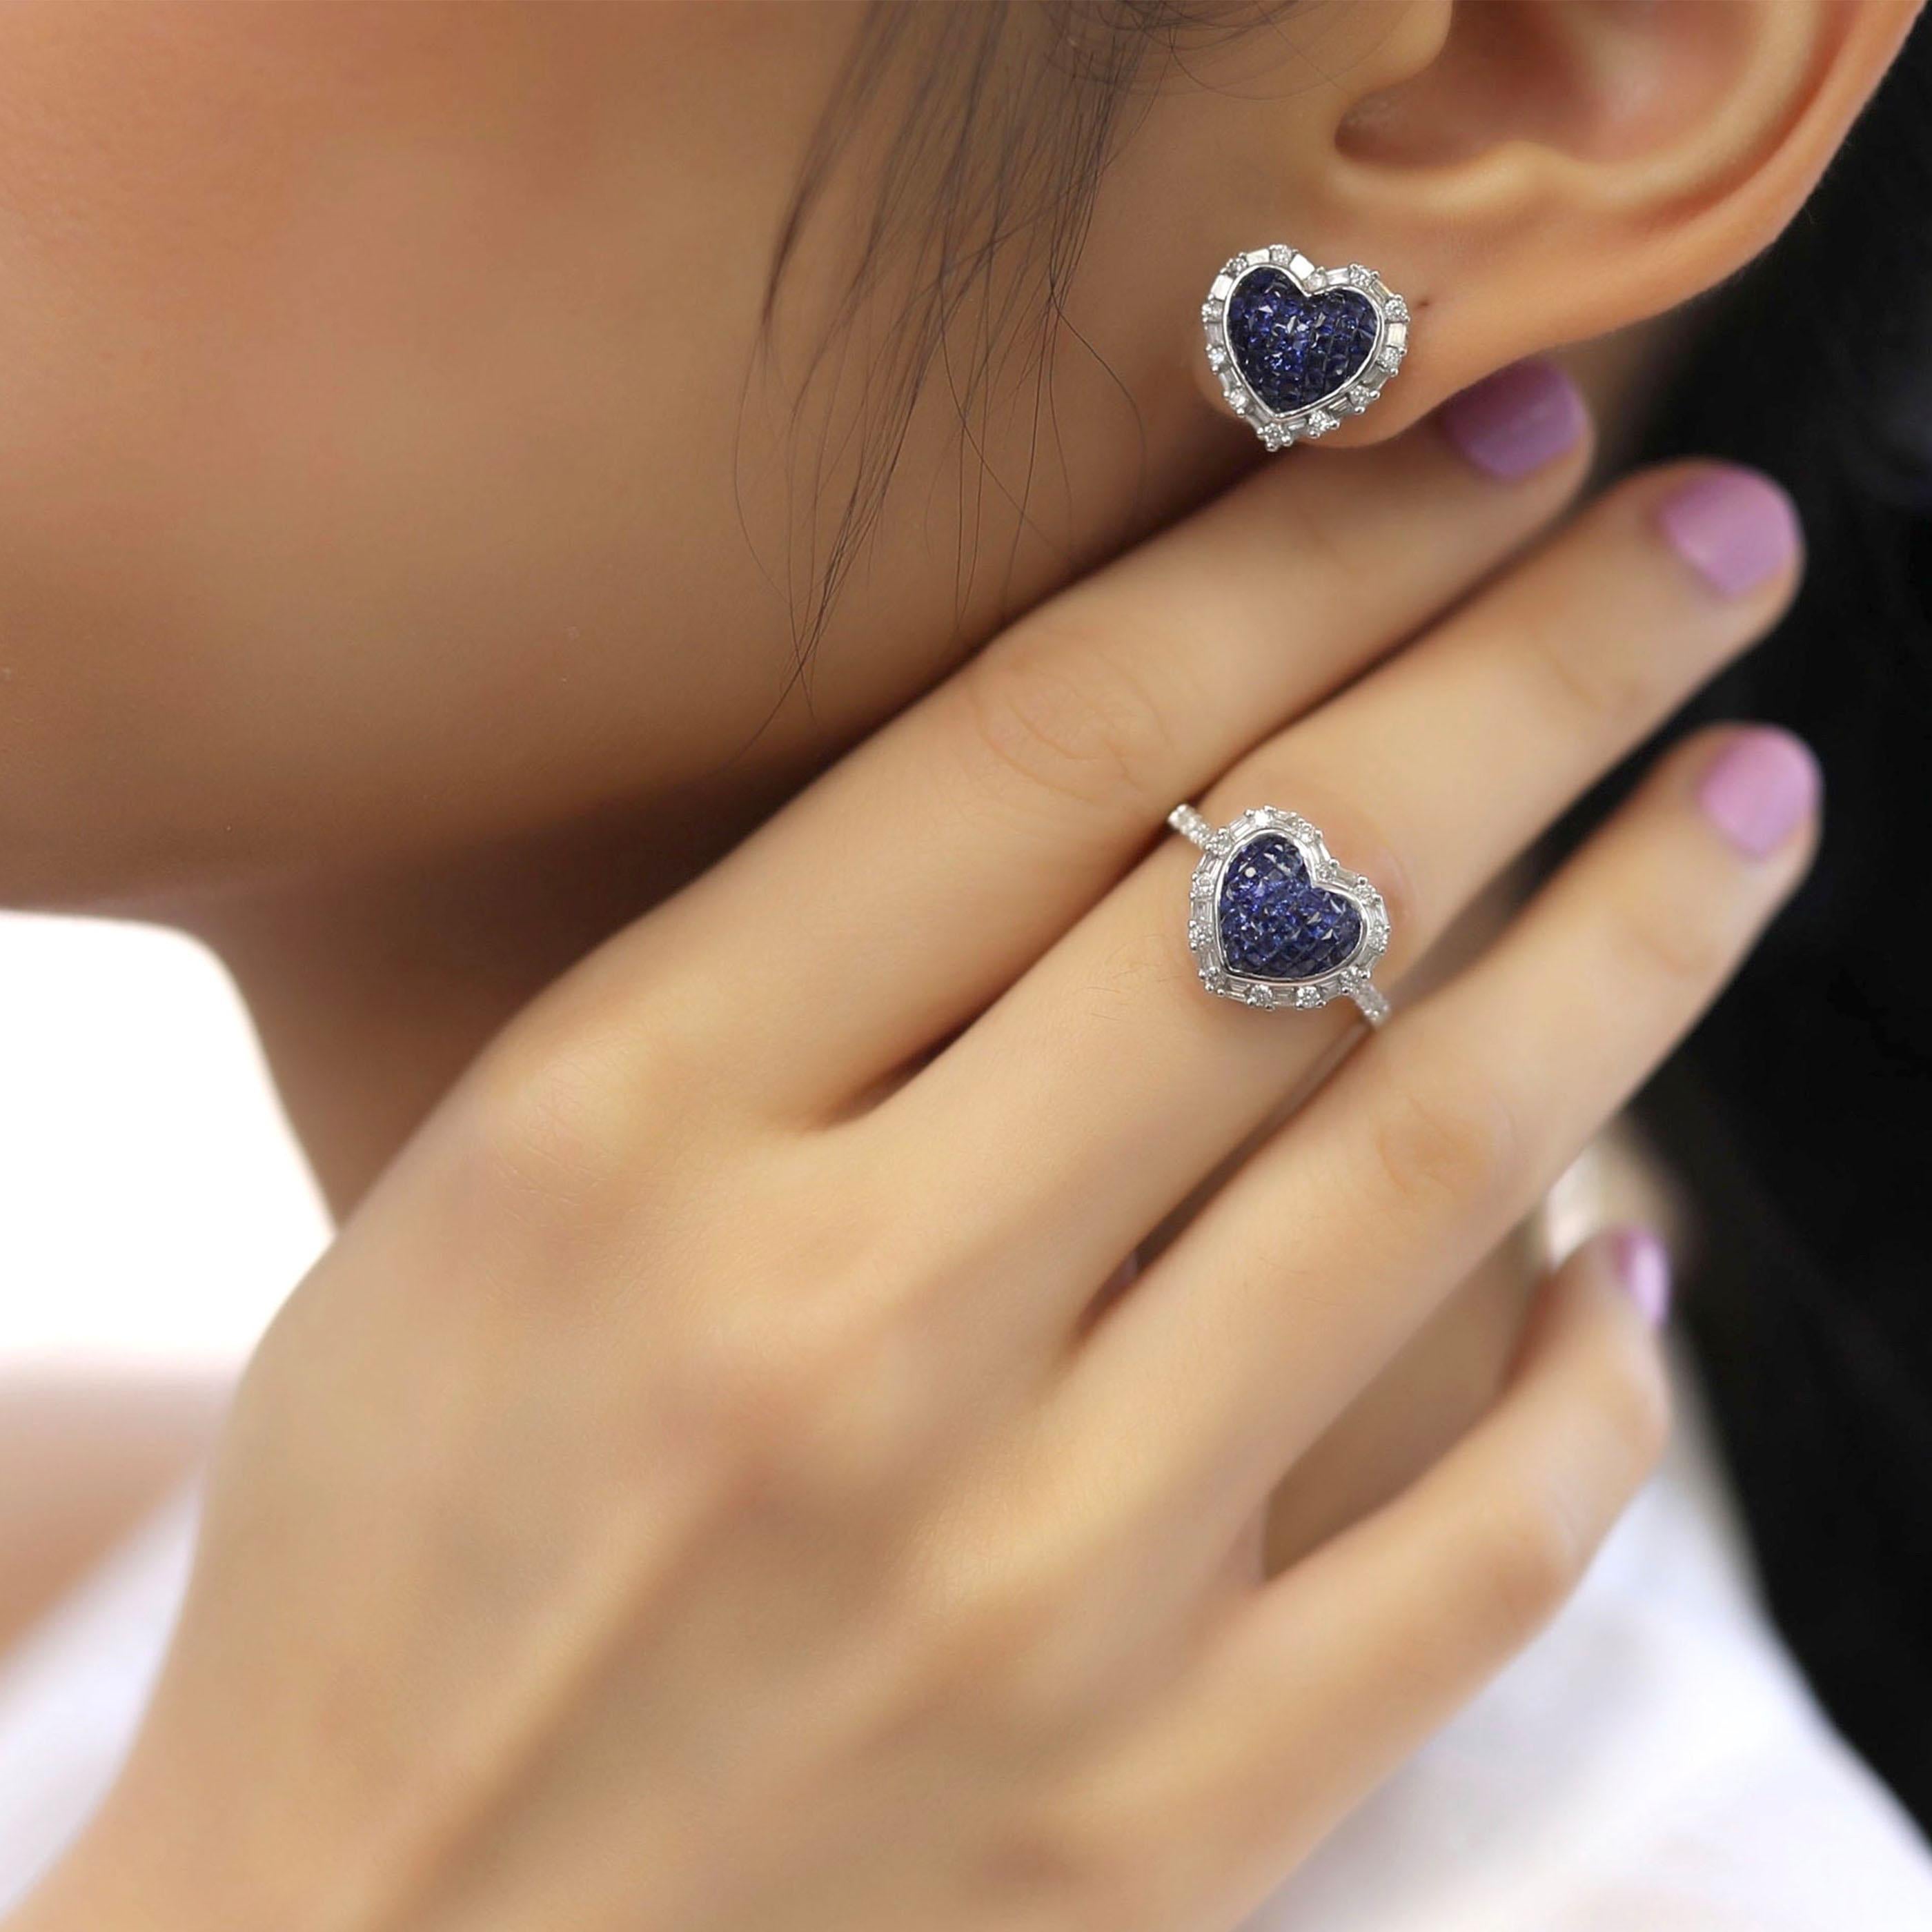 This sapphire sweet heart earring and ring set is crafted in 18-karat white gold, weighing approximately 0.85 total carats of SI-H Quality white diamonds and 1.90 total carats of blue sapphire. The ring is comfortable and can be sized 